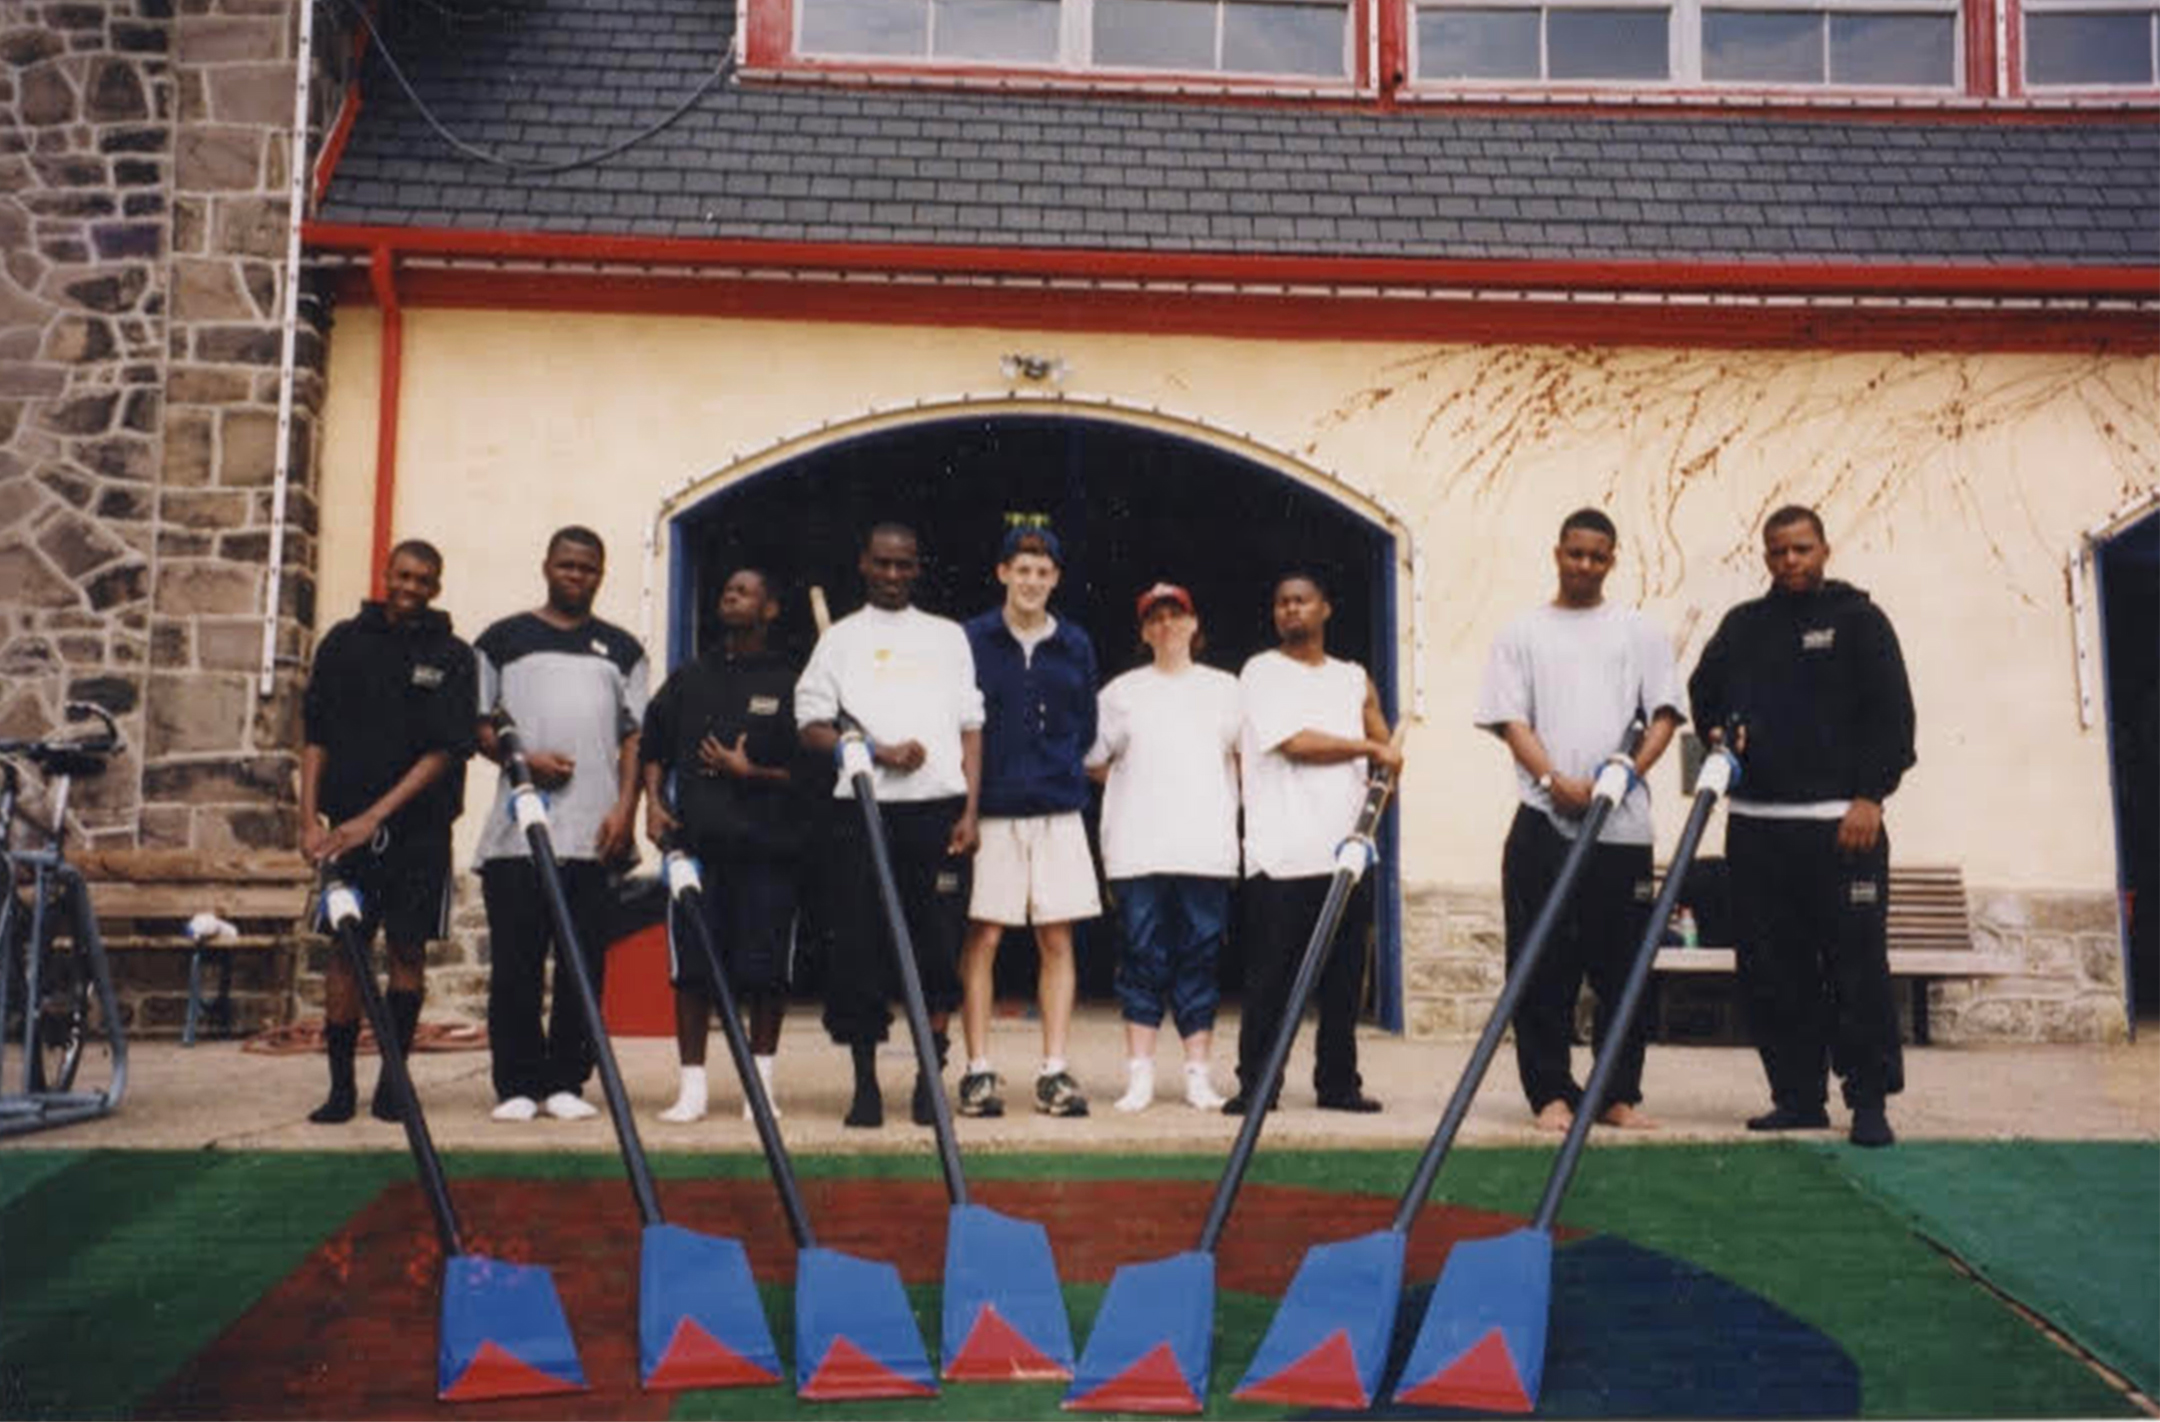 group photo of young black men in front of a boathouse holding oars with their white coach in the middle